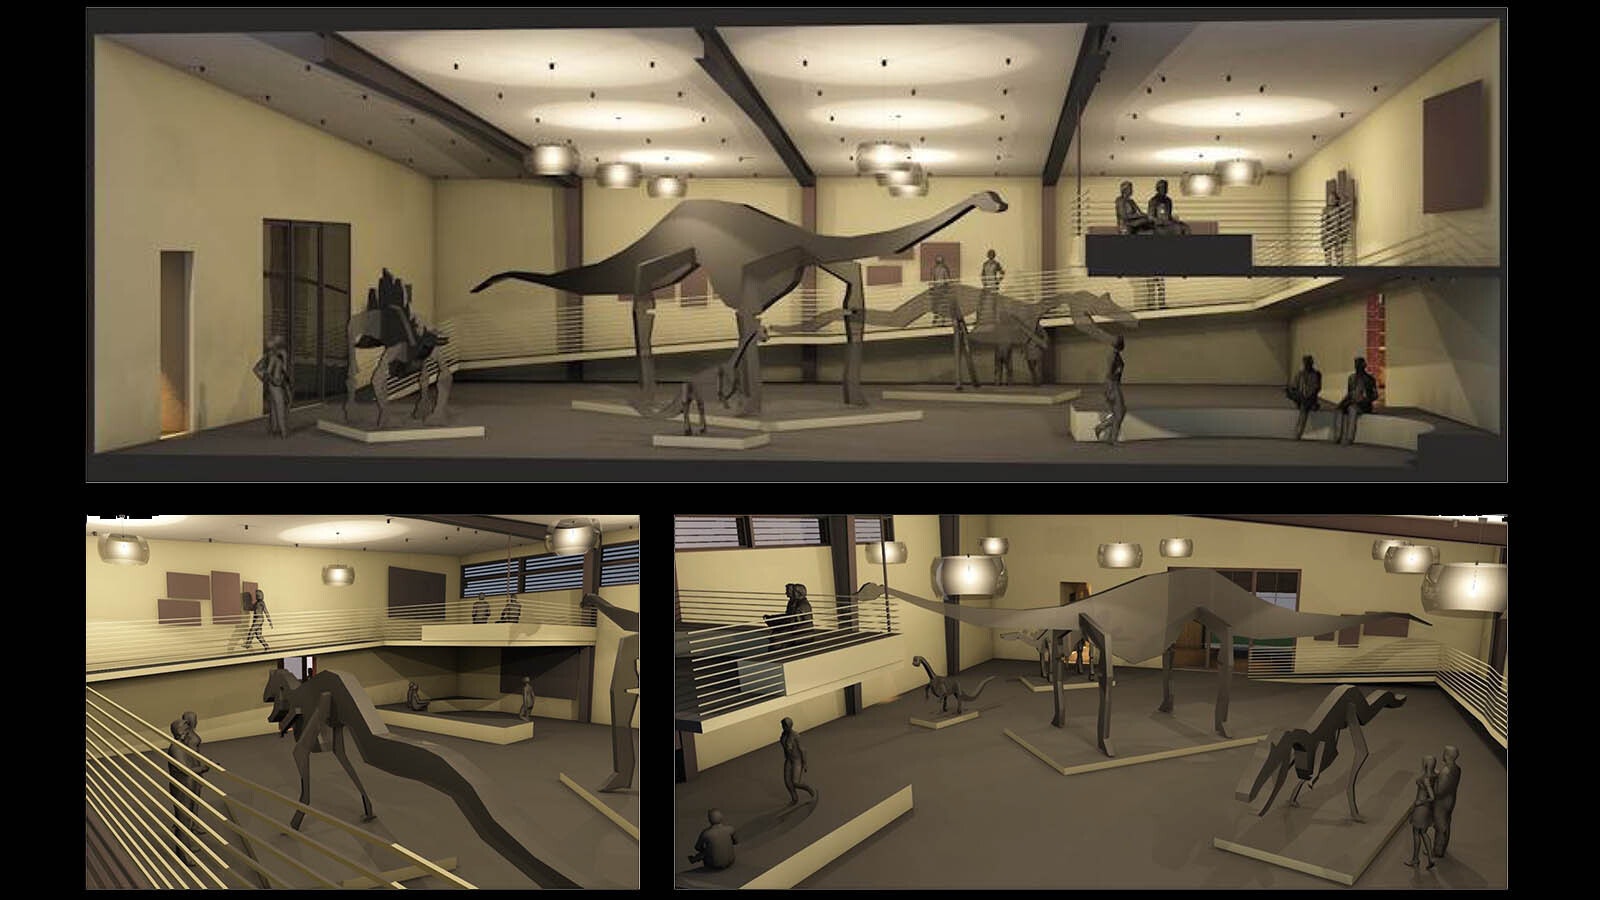 Views of what the inside could look like at the new dinosaur museum in Greybull.